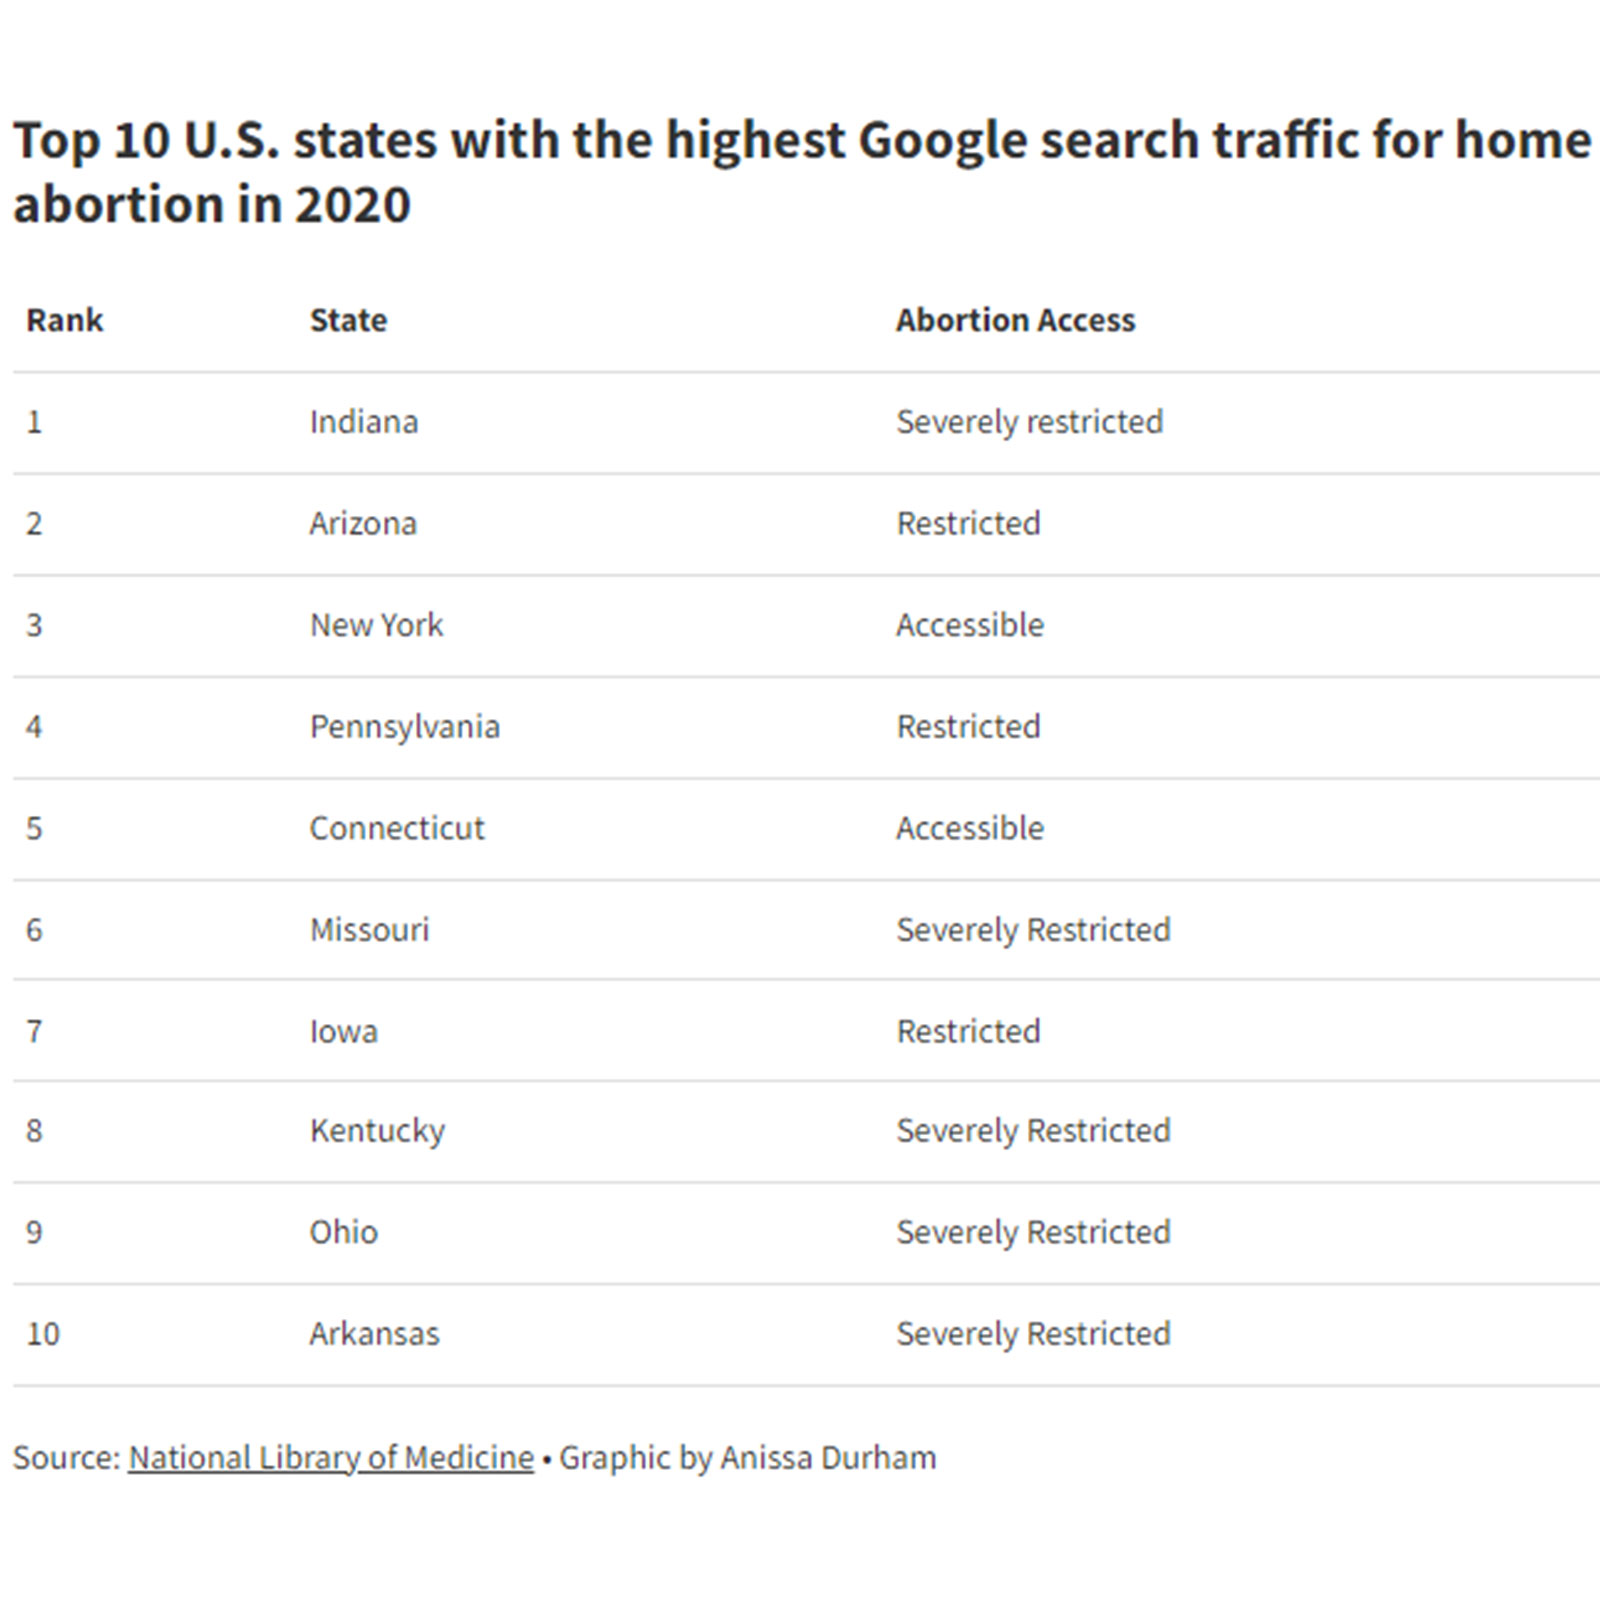 Top 10 U.S. states with the highest Google search traffic for home abortion in 2020